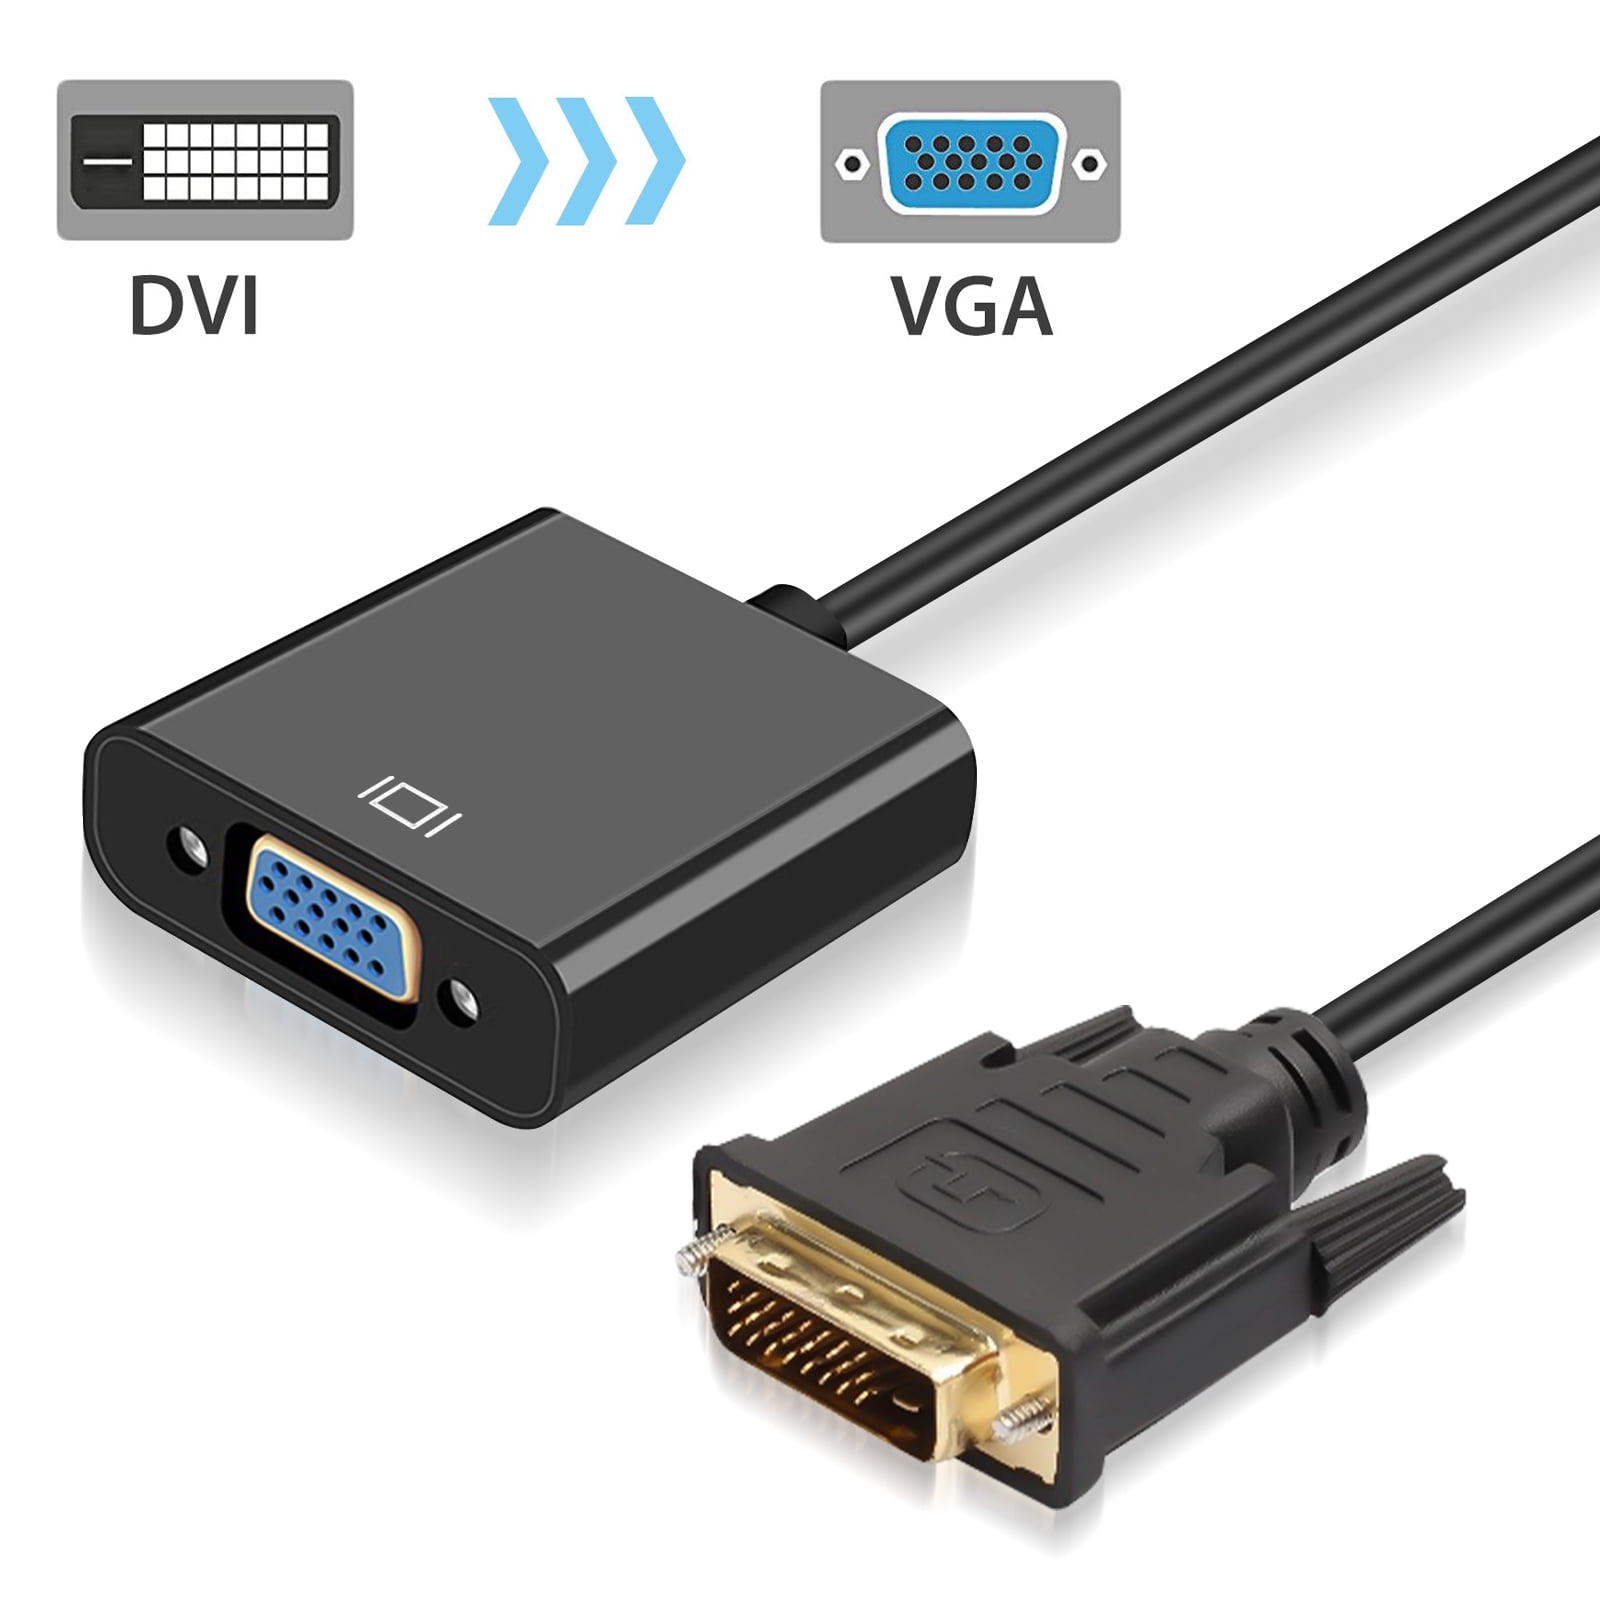 DVI to VGA Adapter,1080P Active DVI-D to VGA Adapter Converter 24+1 Male to Female Supporting 60Hz and 3D for DVI systems to connect to VGA displays 